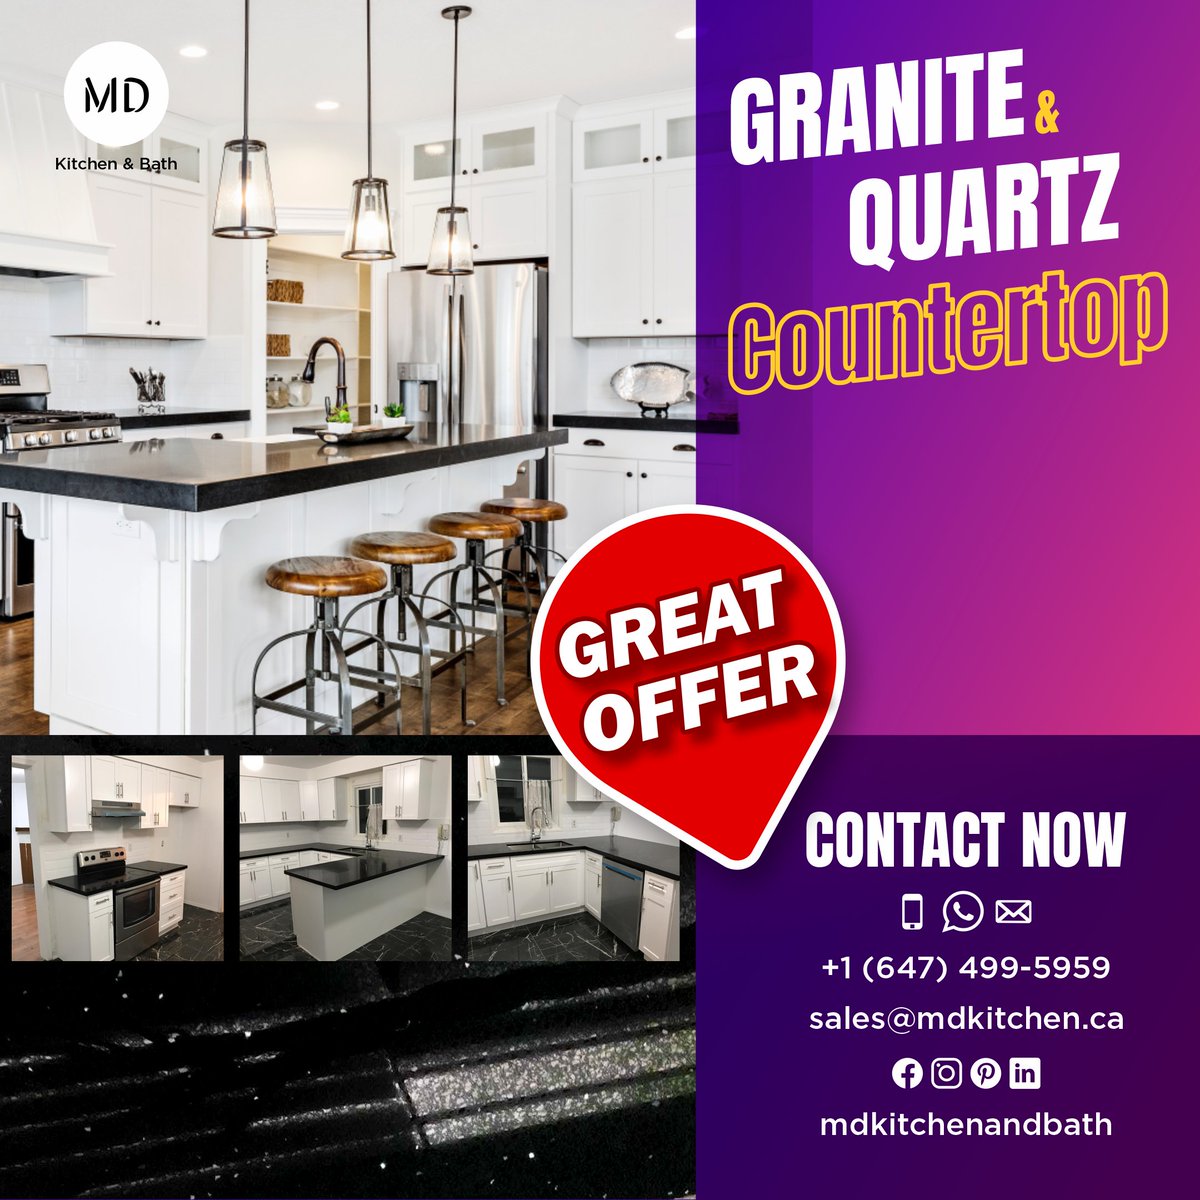 Buy Granite and Quartz Countertops Online
Contact us today at +1 (647) 499-5959  or email us at sales@mdkitchen.ca
to learn more about our products and services
#quartzcountertops #granitecountertops #quartzworktops #graniteworktops
#kitchenremodel #luxuryhomes #customcountertops